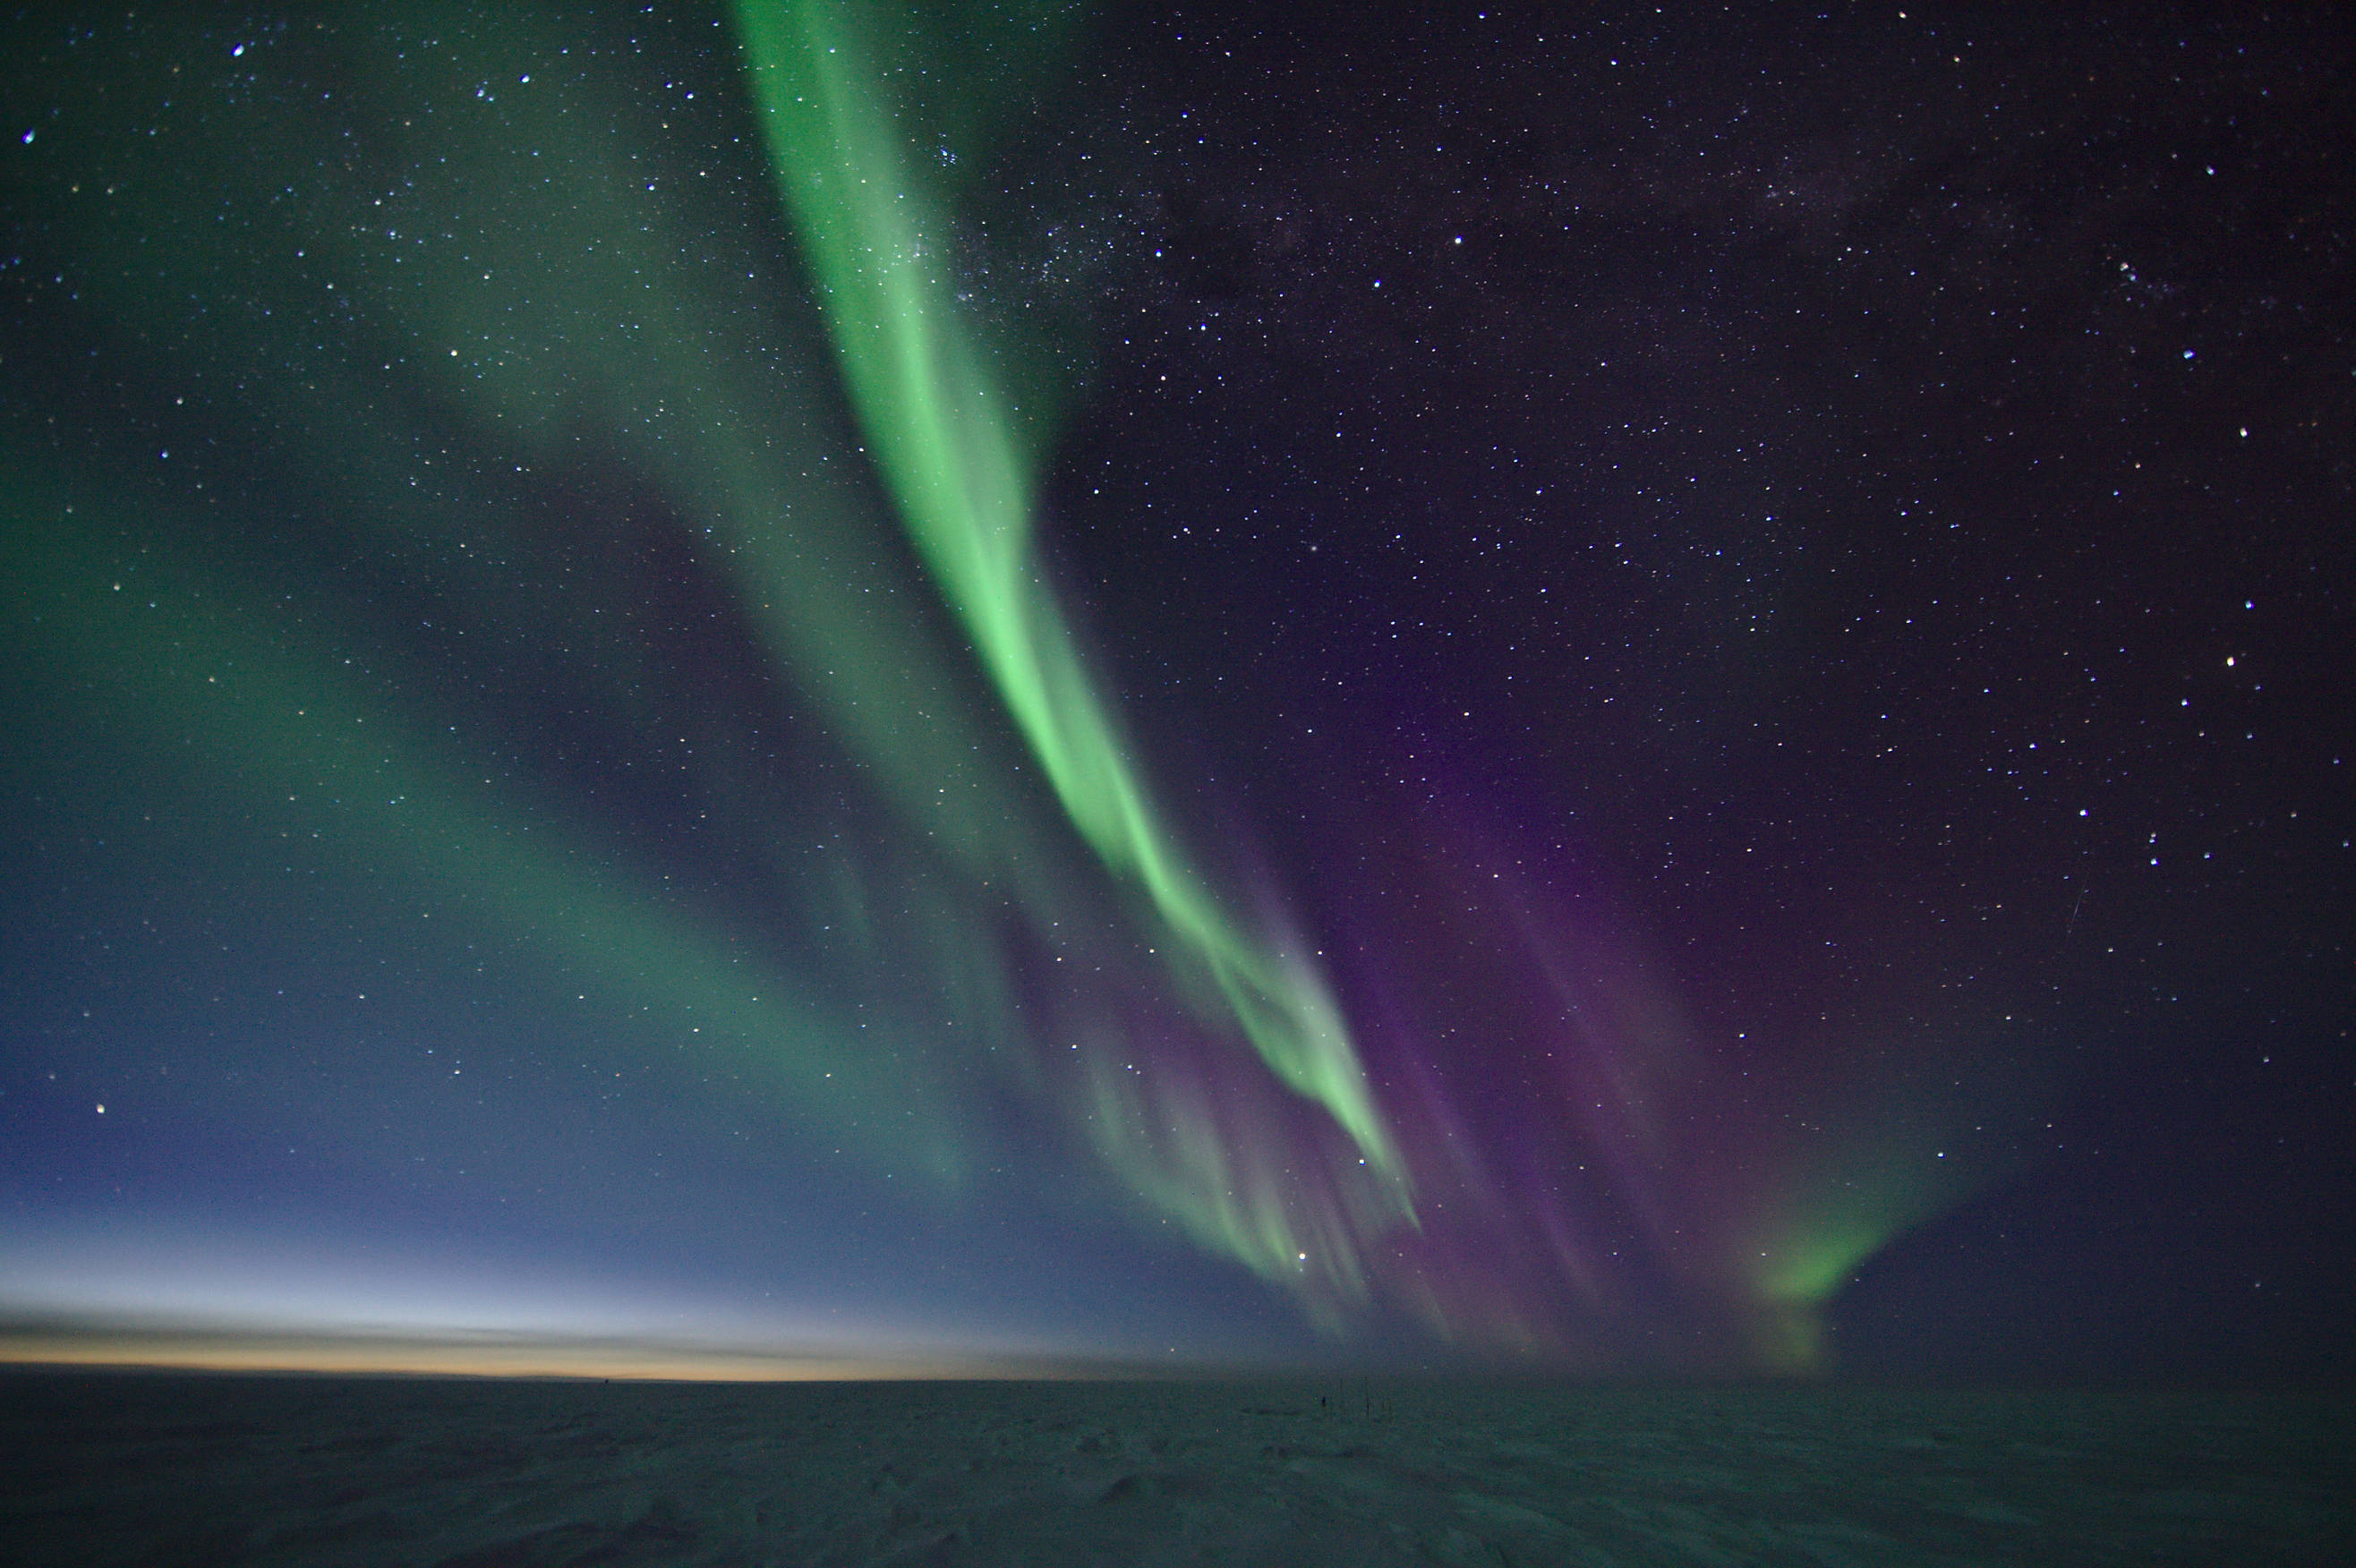 View outside - the frozen landscape of the south pole illuminated by beautiful auroras and a tiny glimpse of sunlight